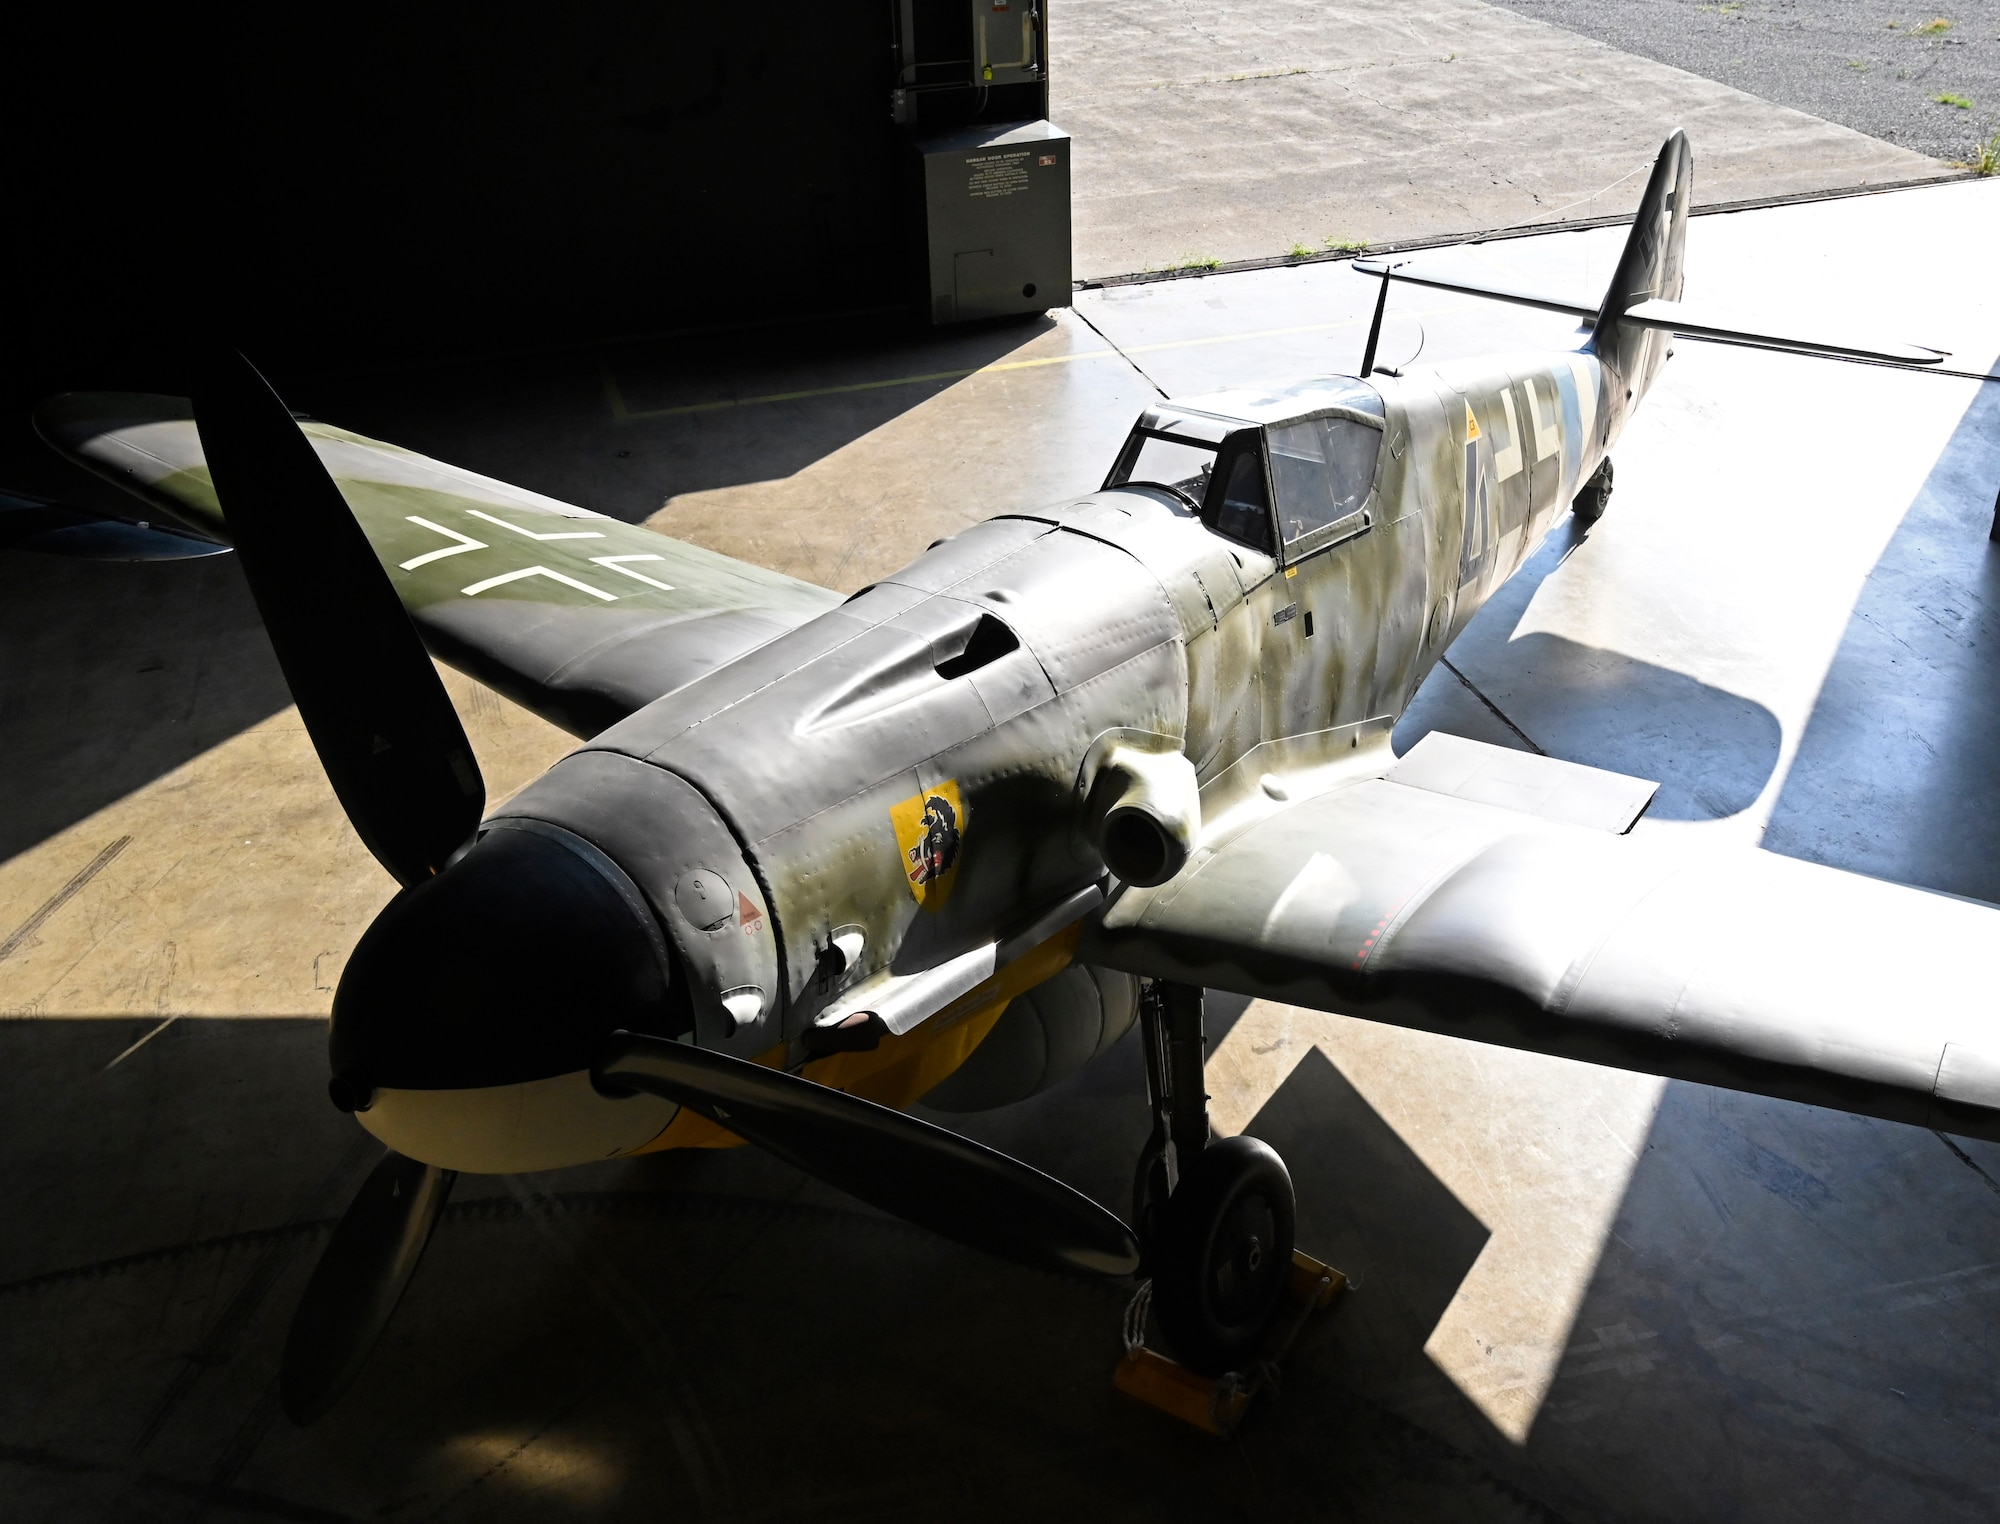 Messerschmitt Bf 109G-10 at the National Museum of the United States Air Force.